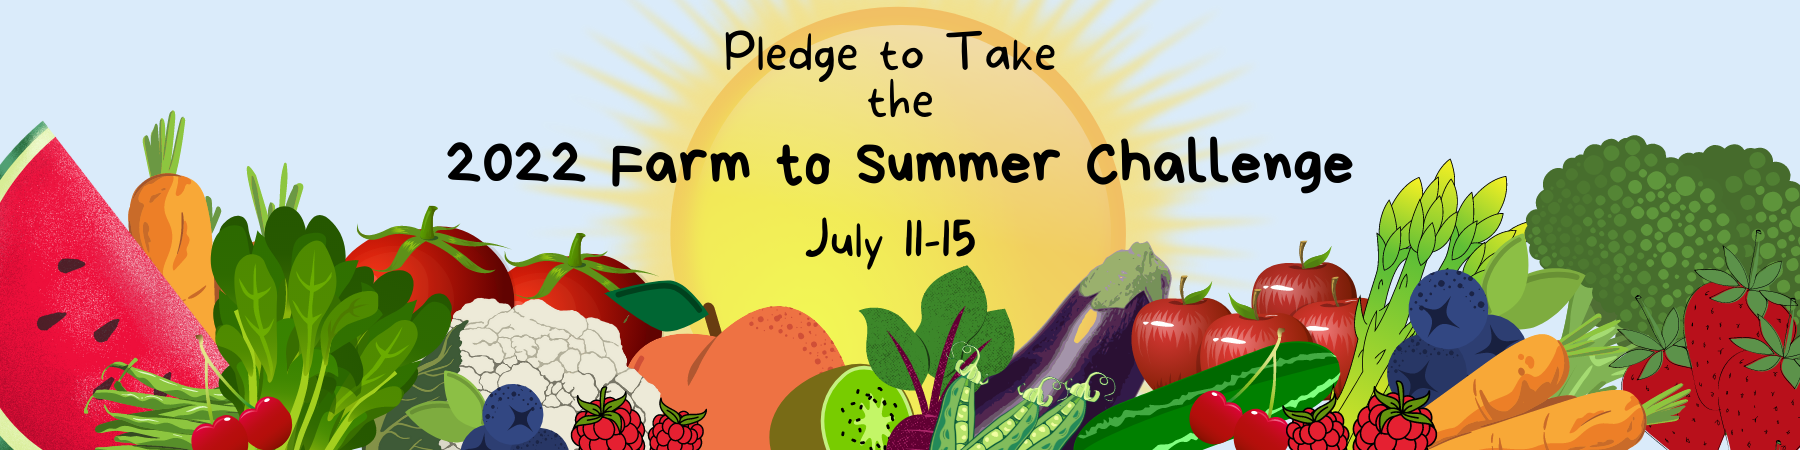 Farm to Summer Challenge Mixed Fruit and Veggie Image